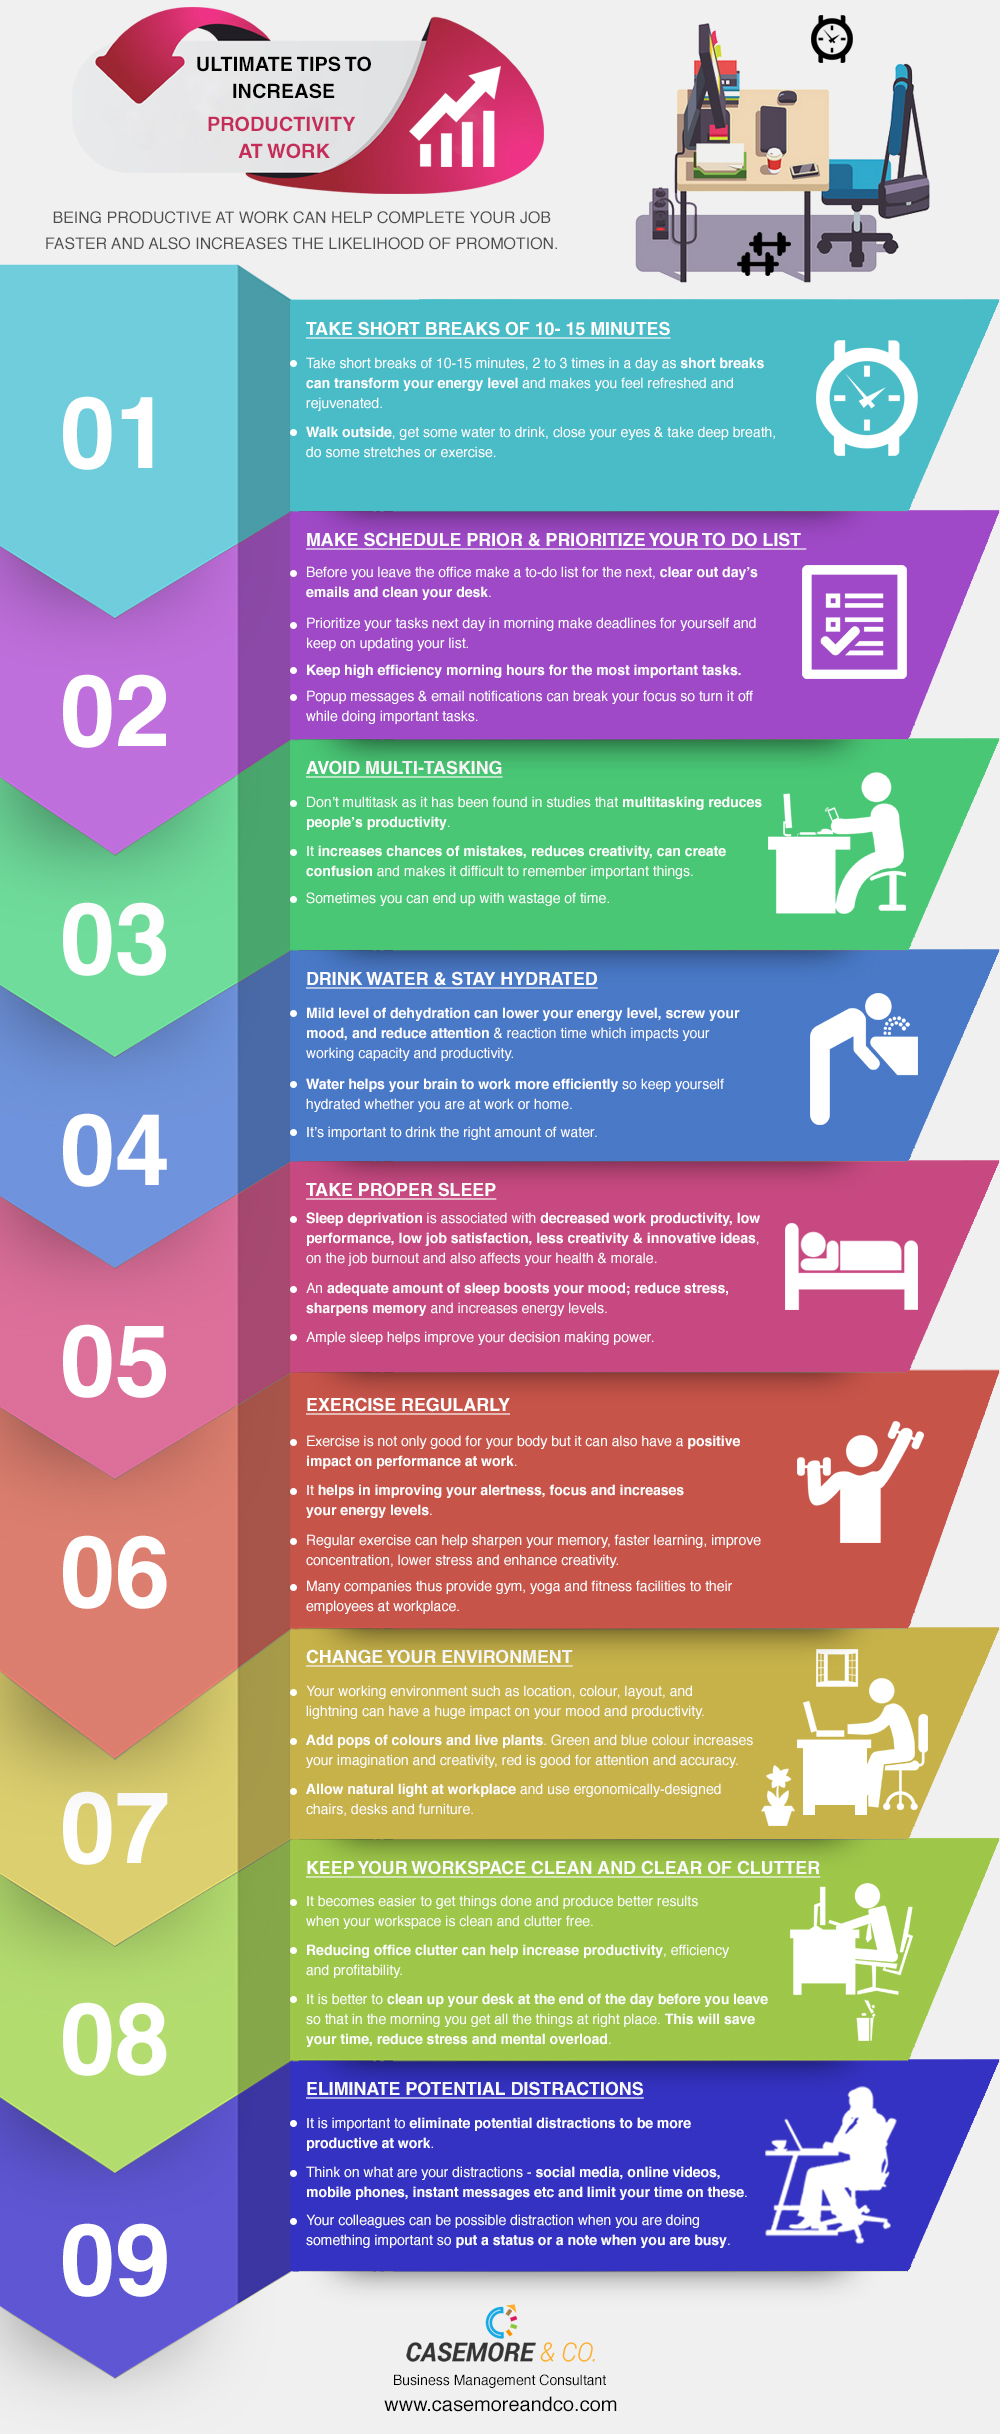 Best Tips To Increase Productivity At Work-An-Infographic